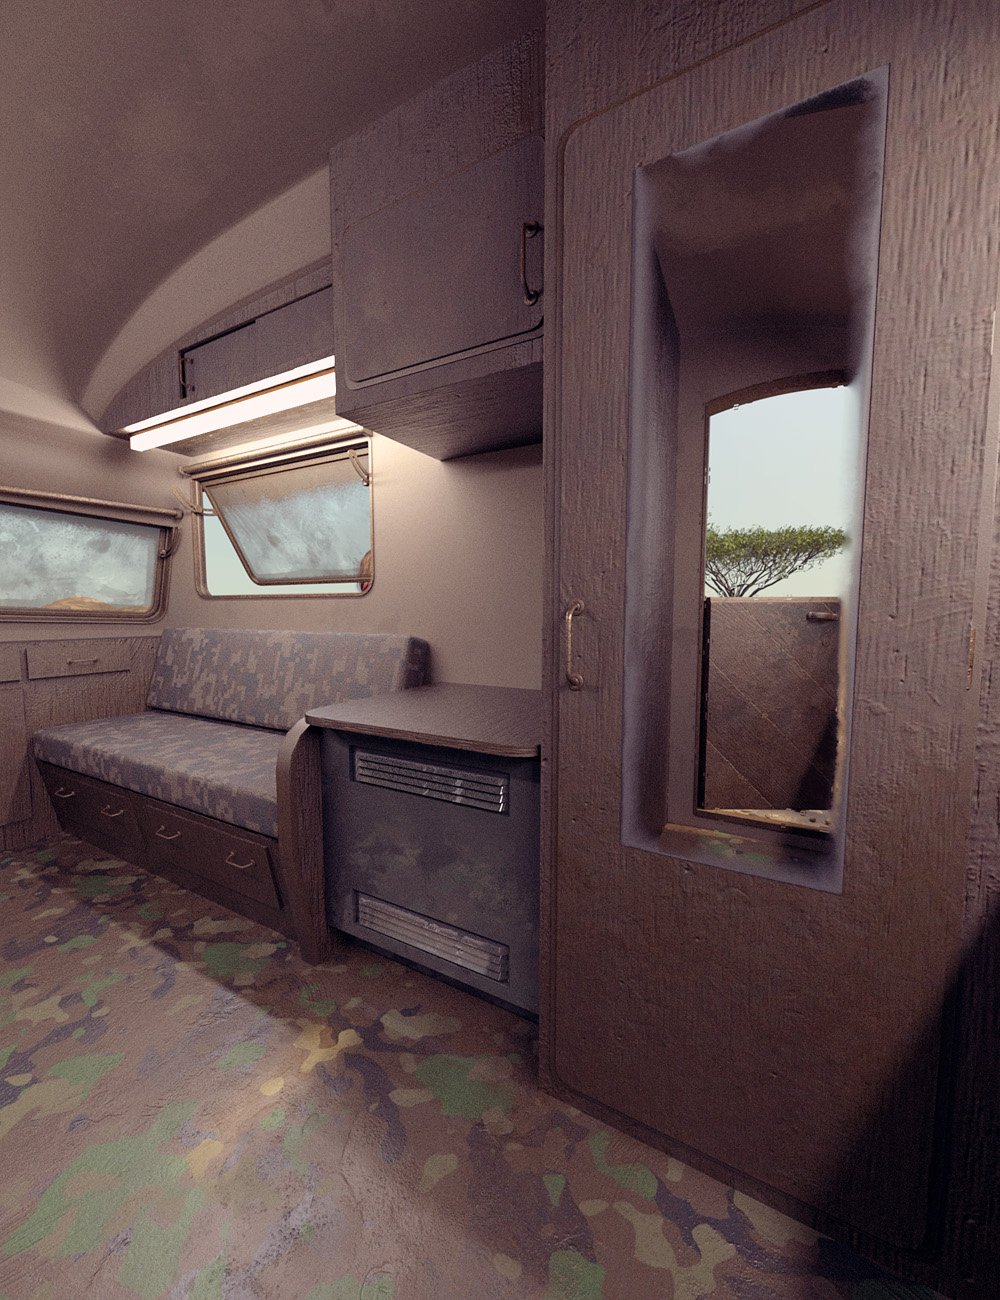 Dystopia for the Vintage Caravan and Props by: ForbiddenWhispers, 3D Models by Daz 3D